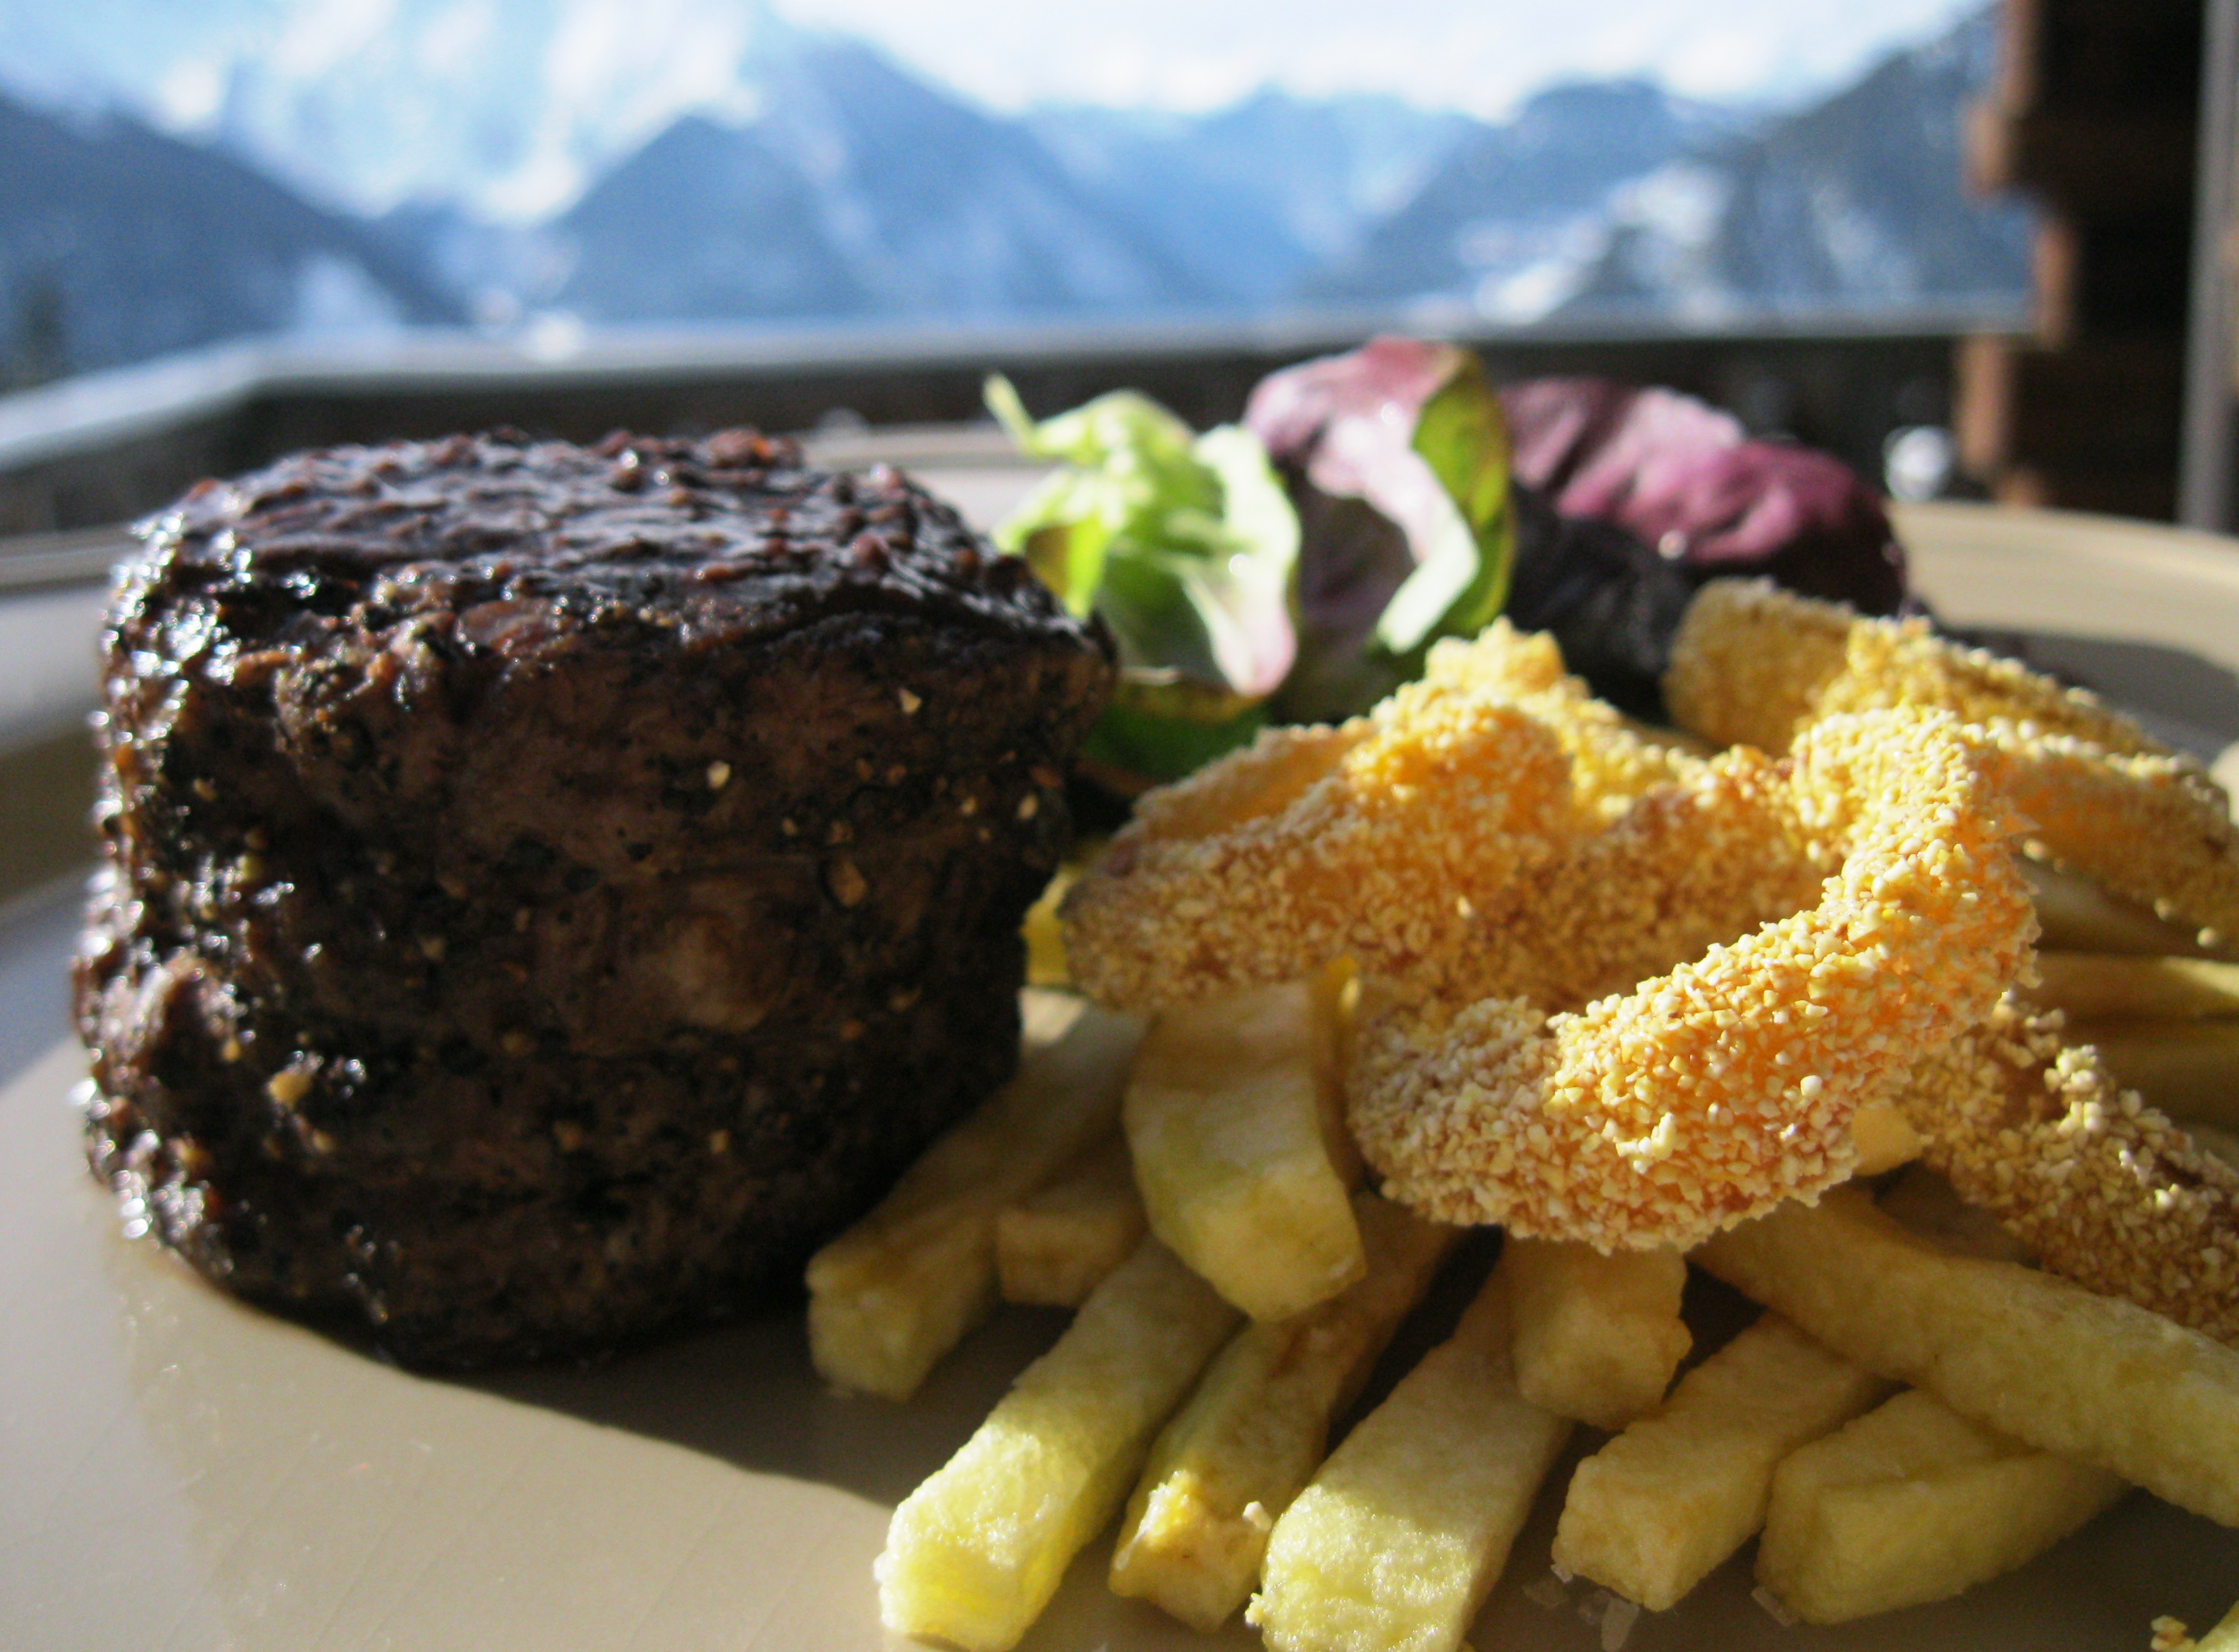 fillet steak cormeal crusted onion skinny chips